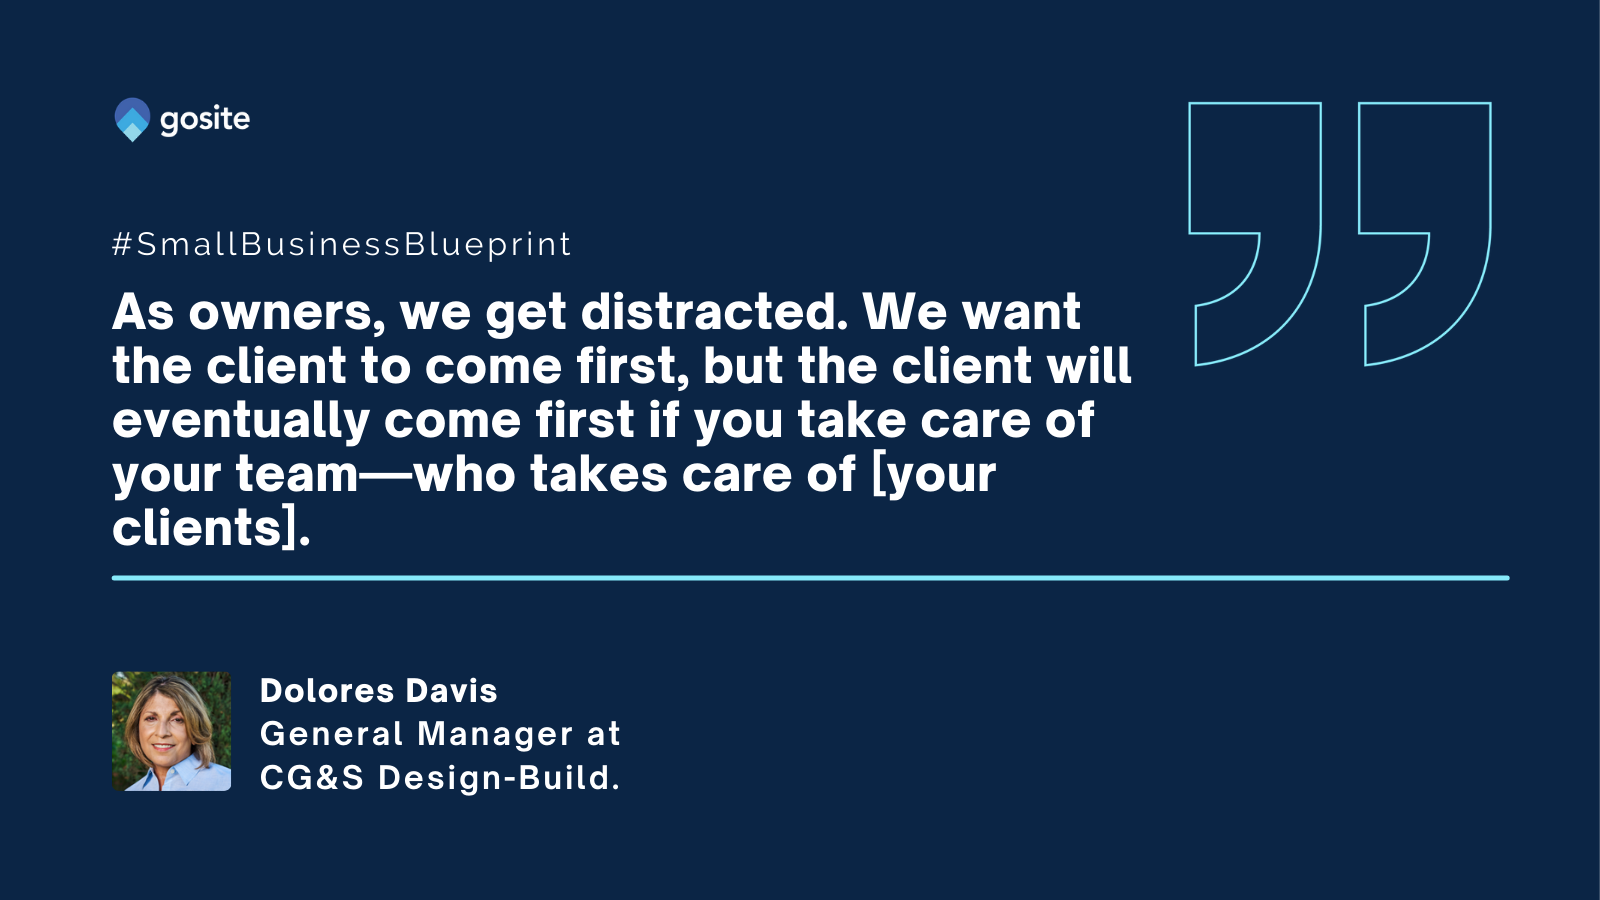 Quote by Dolores Davis: Sometimes I think, as owners, we get distracted, we want the client to come first, but the client will eventually come first if you take care of your team, who takes care of [your clients].